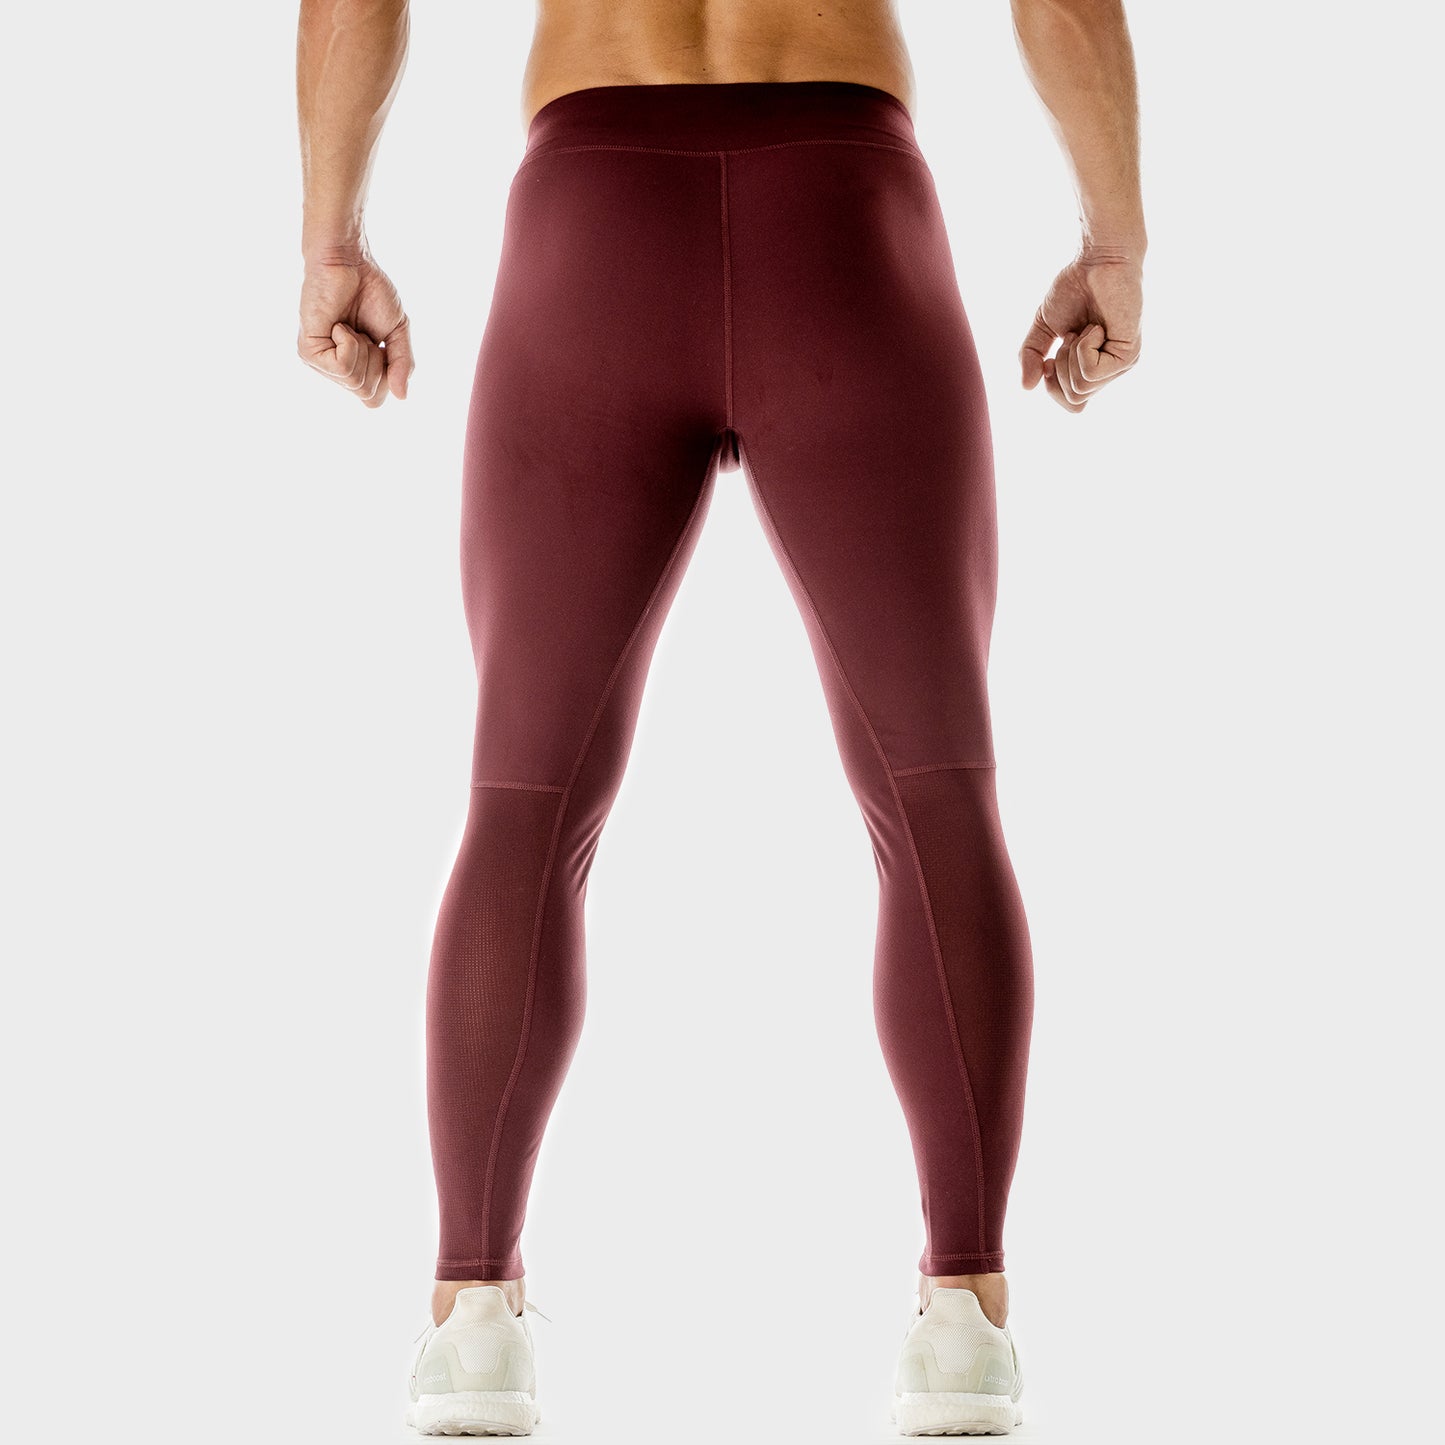 squatwolf-gym-leggings-for-men-360-performance-tights-tawny-port-workout-clothes